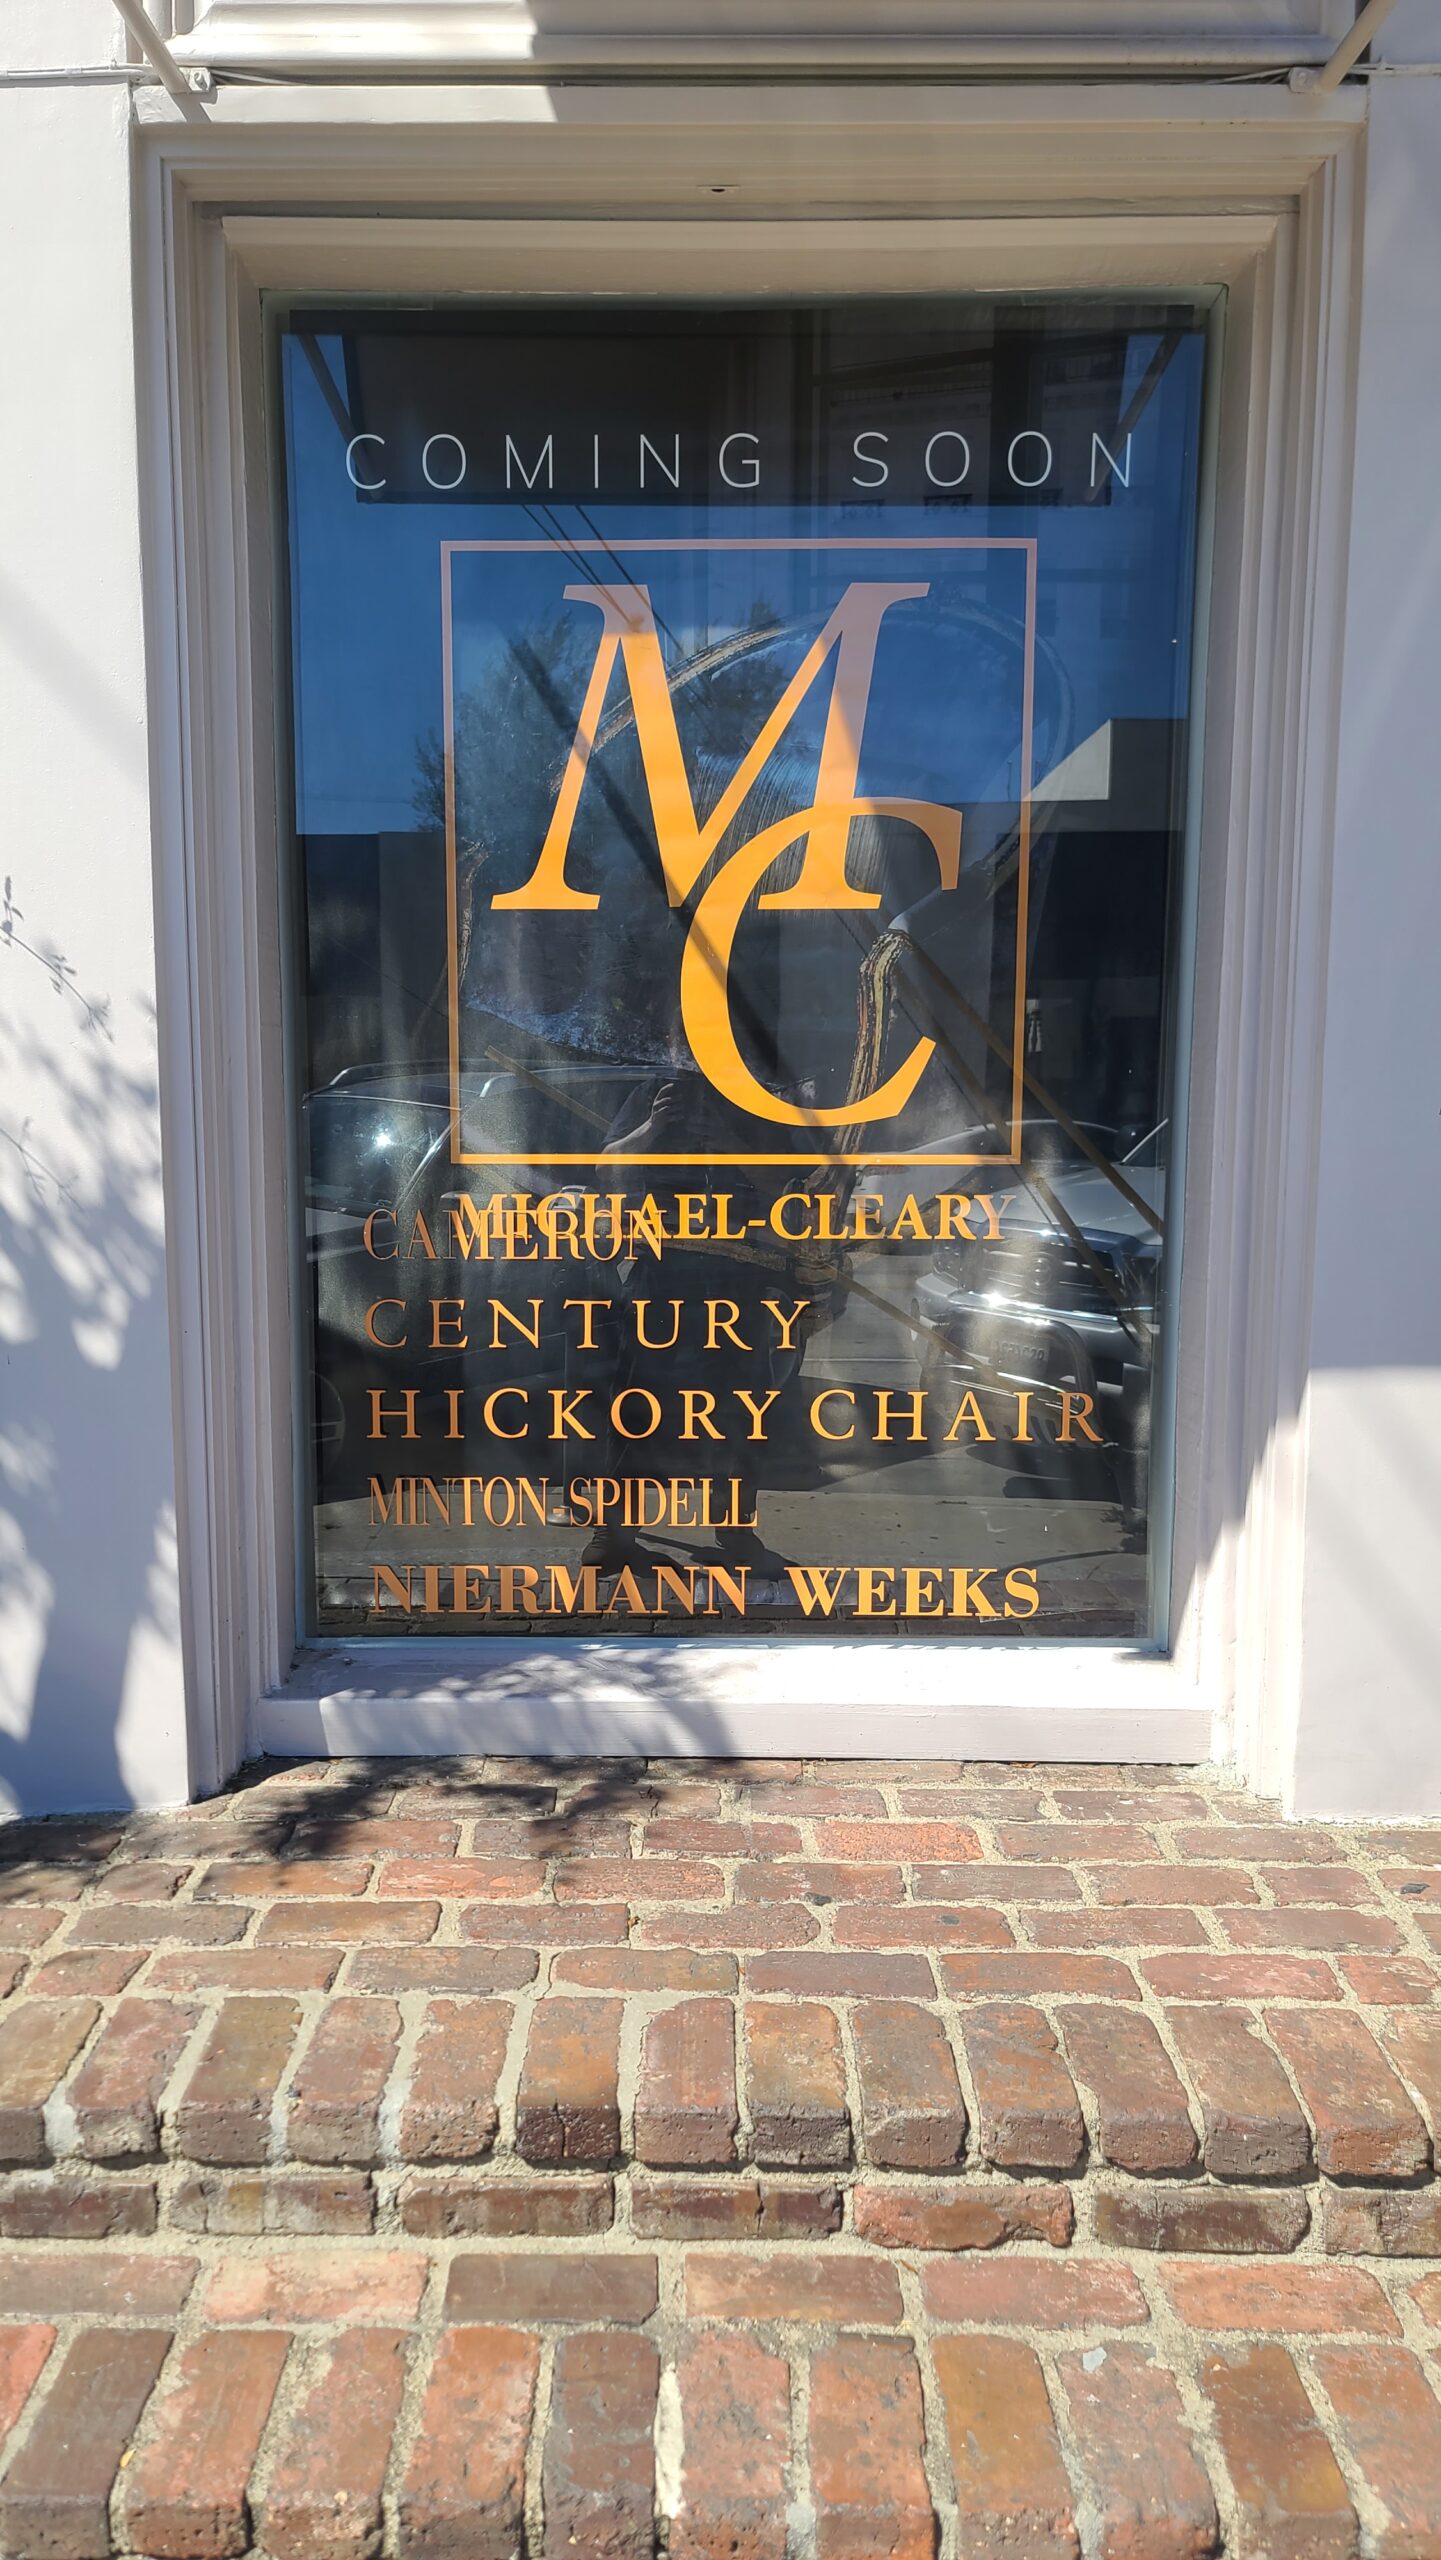 This is the coming soon announcement window graphics for Michael Cleary's West Hollywood design showroom.